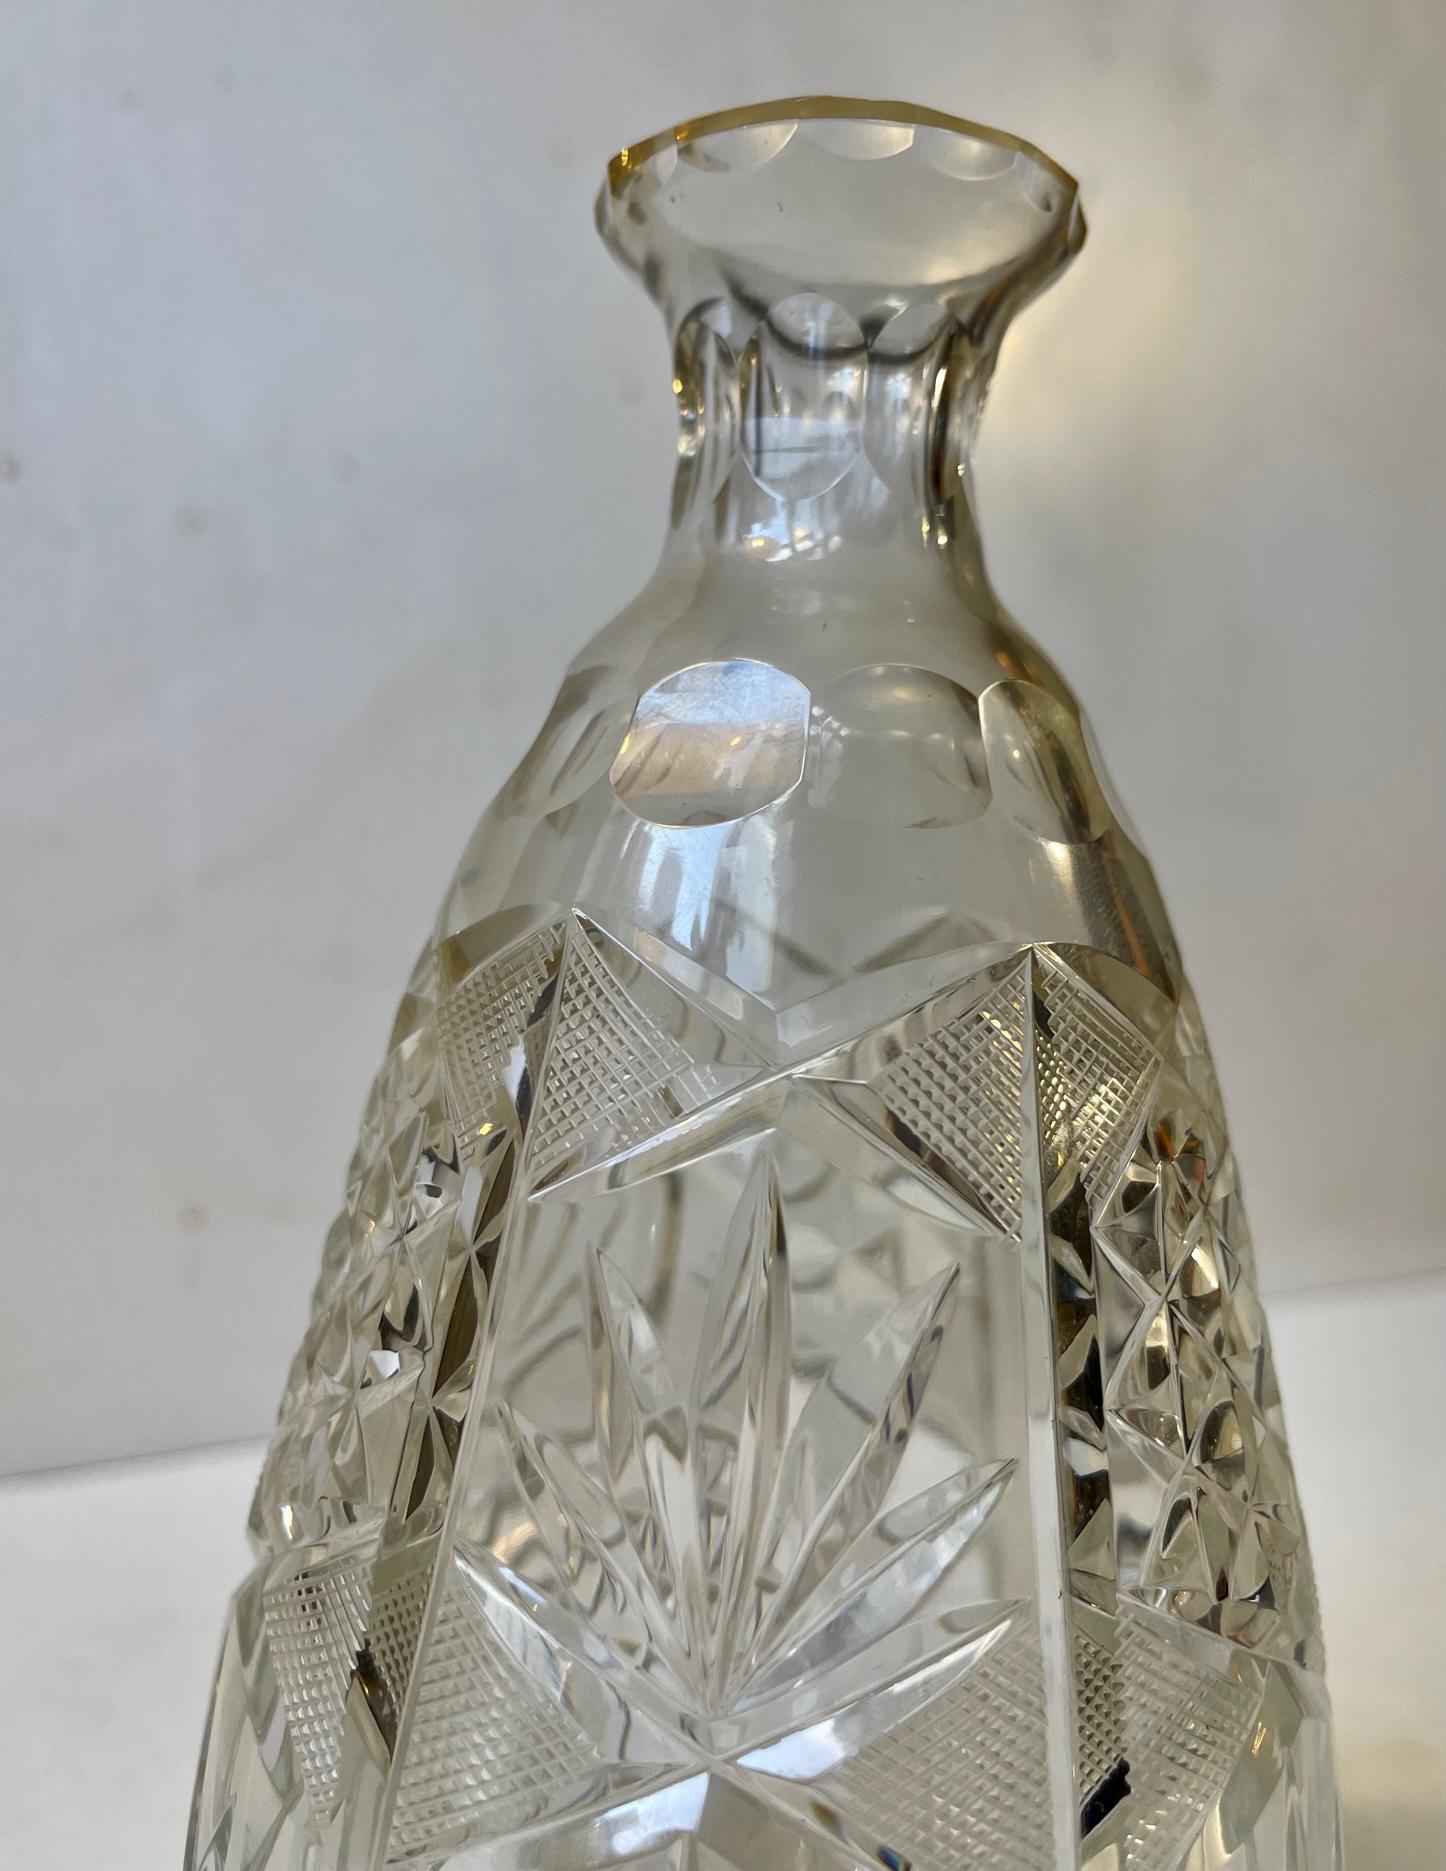 French Midcentury Cut Crystal Decanter from Cristal De Lorraine, 1950s For Sale 1